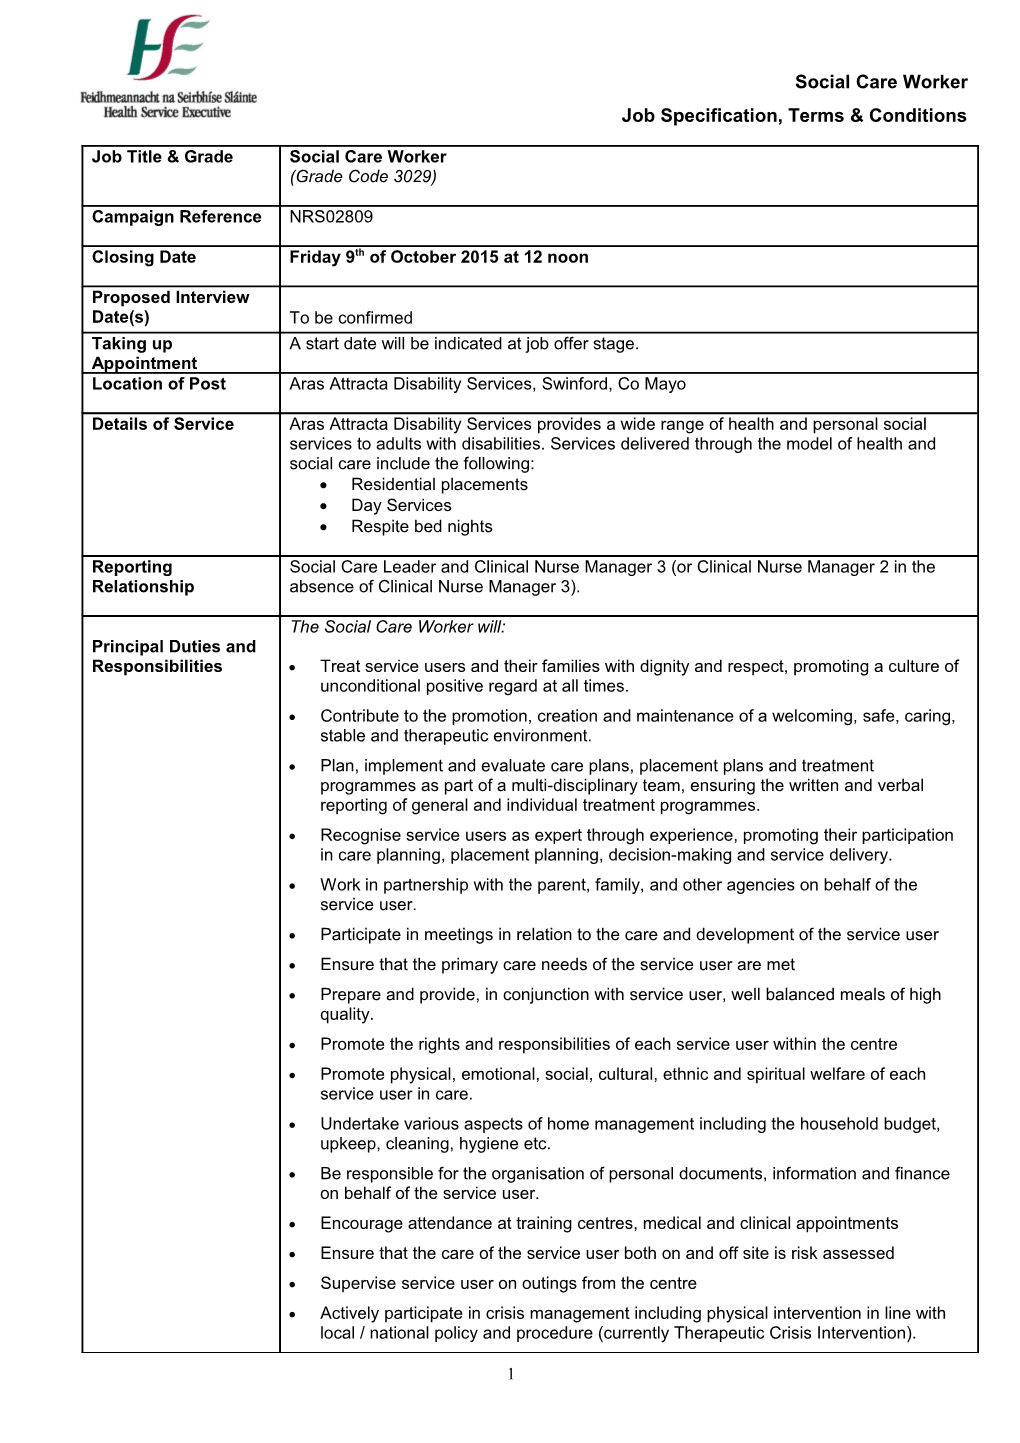 Job Specification, Terms & Conditions